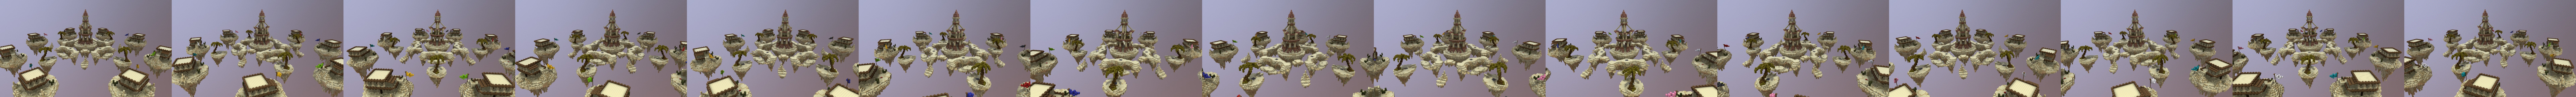 Map Bedwars Minecraft - A 3D model collection by chikoumbaran1001 -  Sketchfab